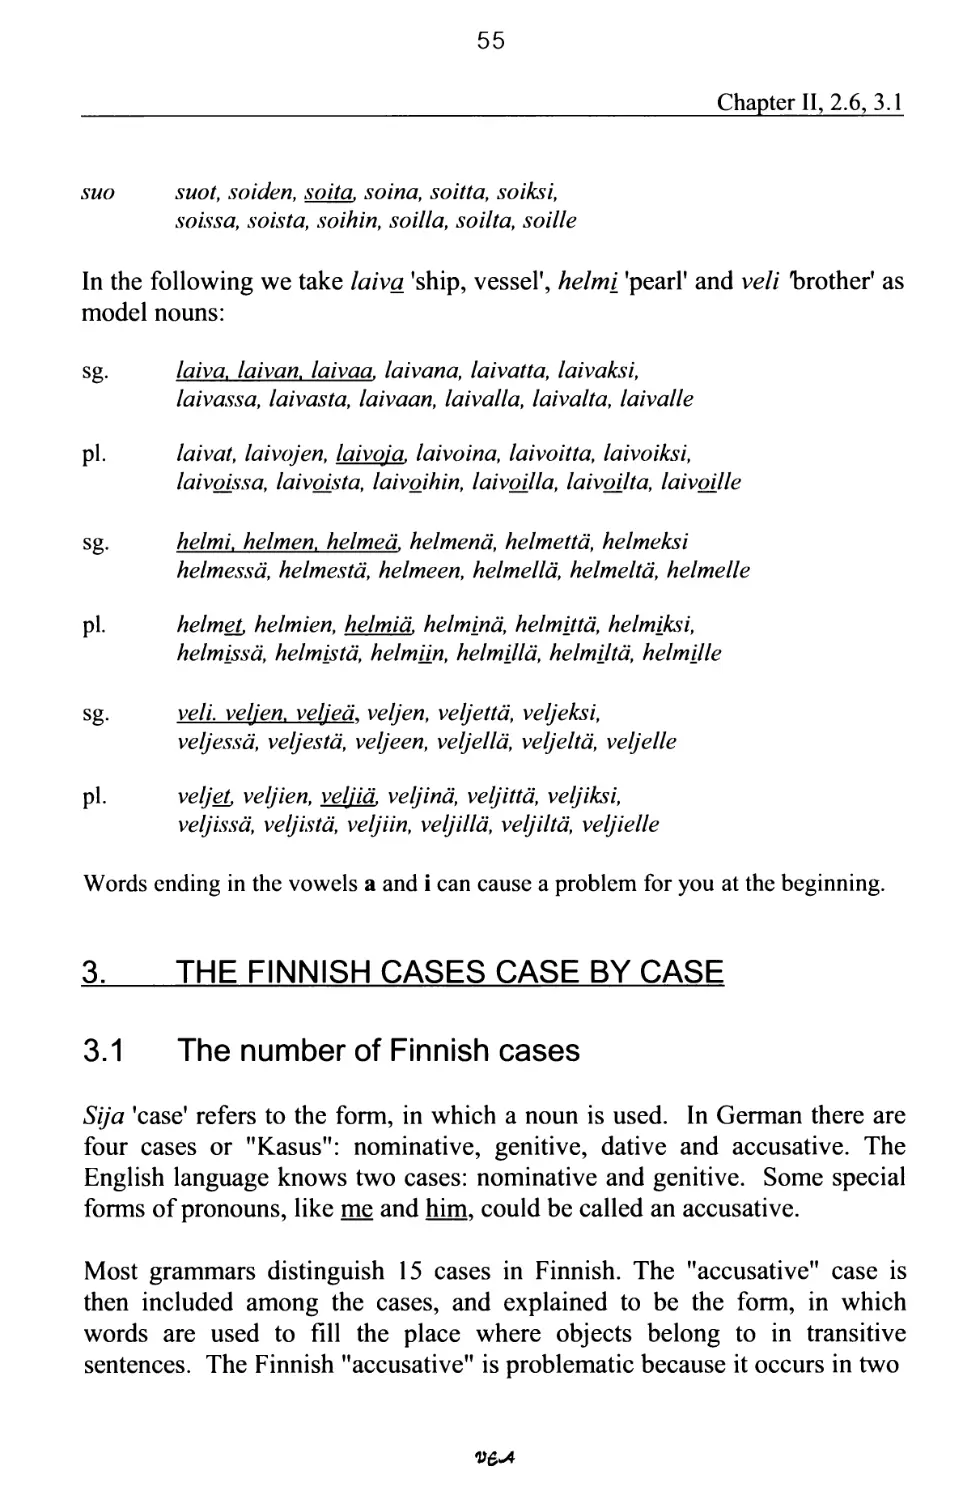 3. THE FINNISH CASES CASE BY CASE